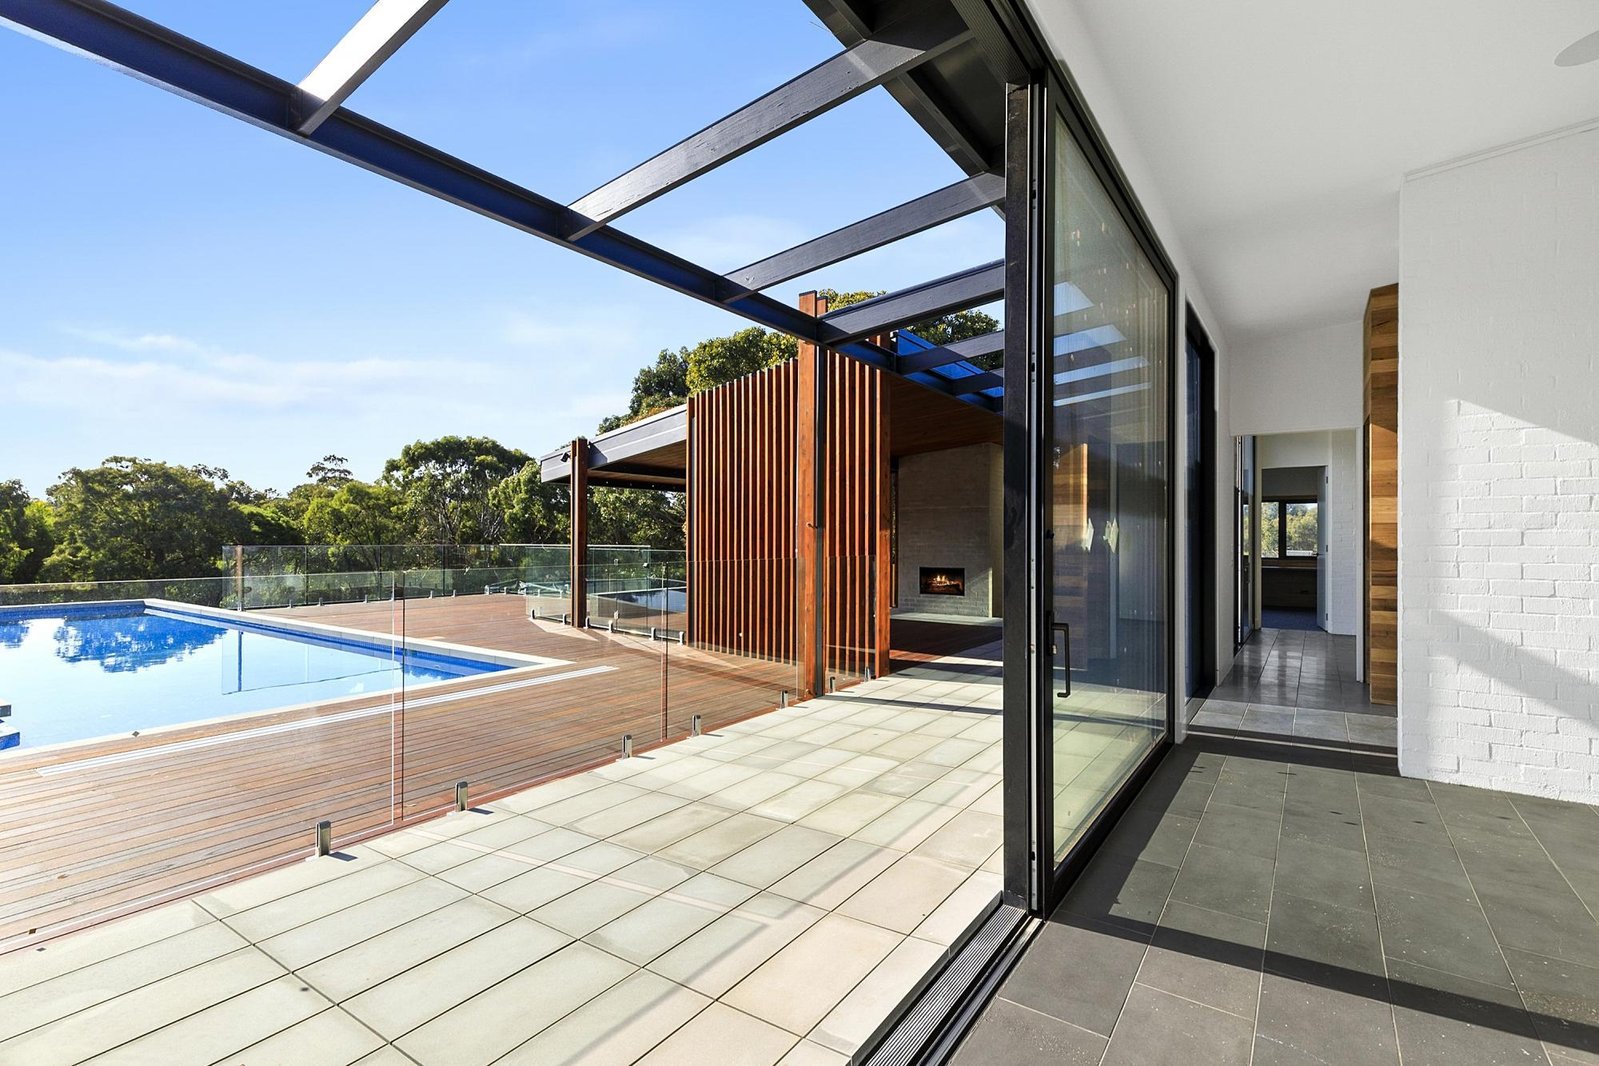 Indoor outdoor living is featured here with a living space opening out onto a large pool